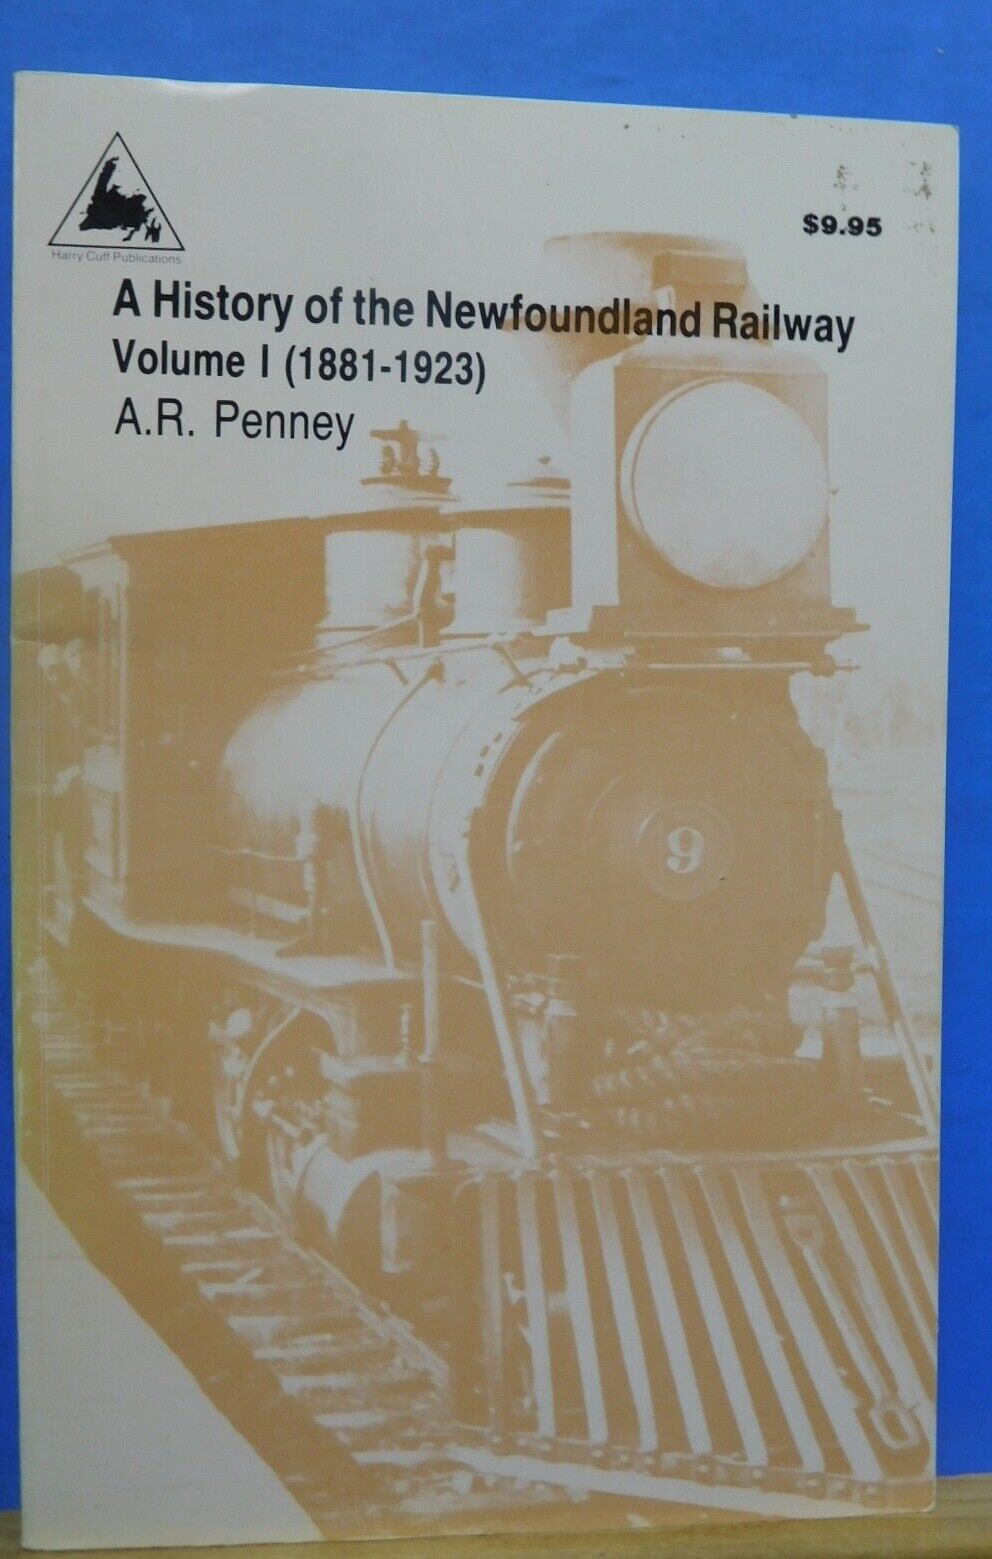 History of the Newfoundland Railway Volume 1 by A R Penney Soft Cover 1988